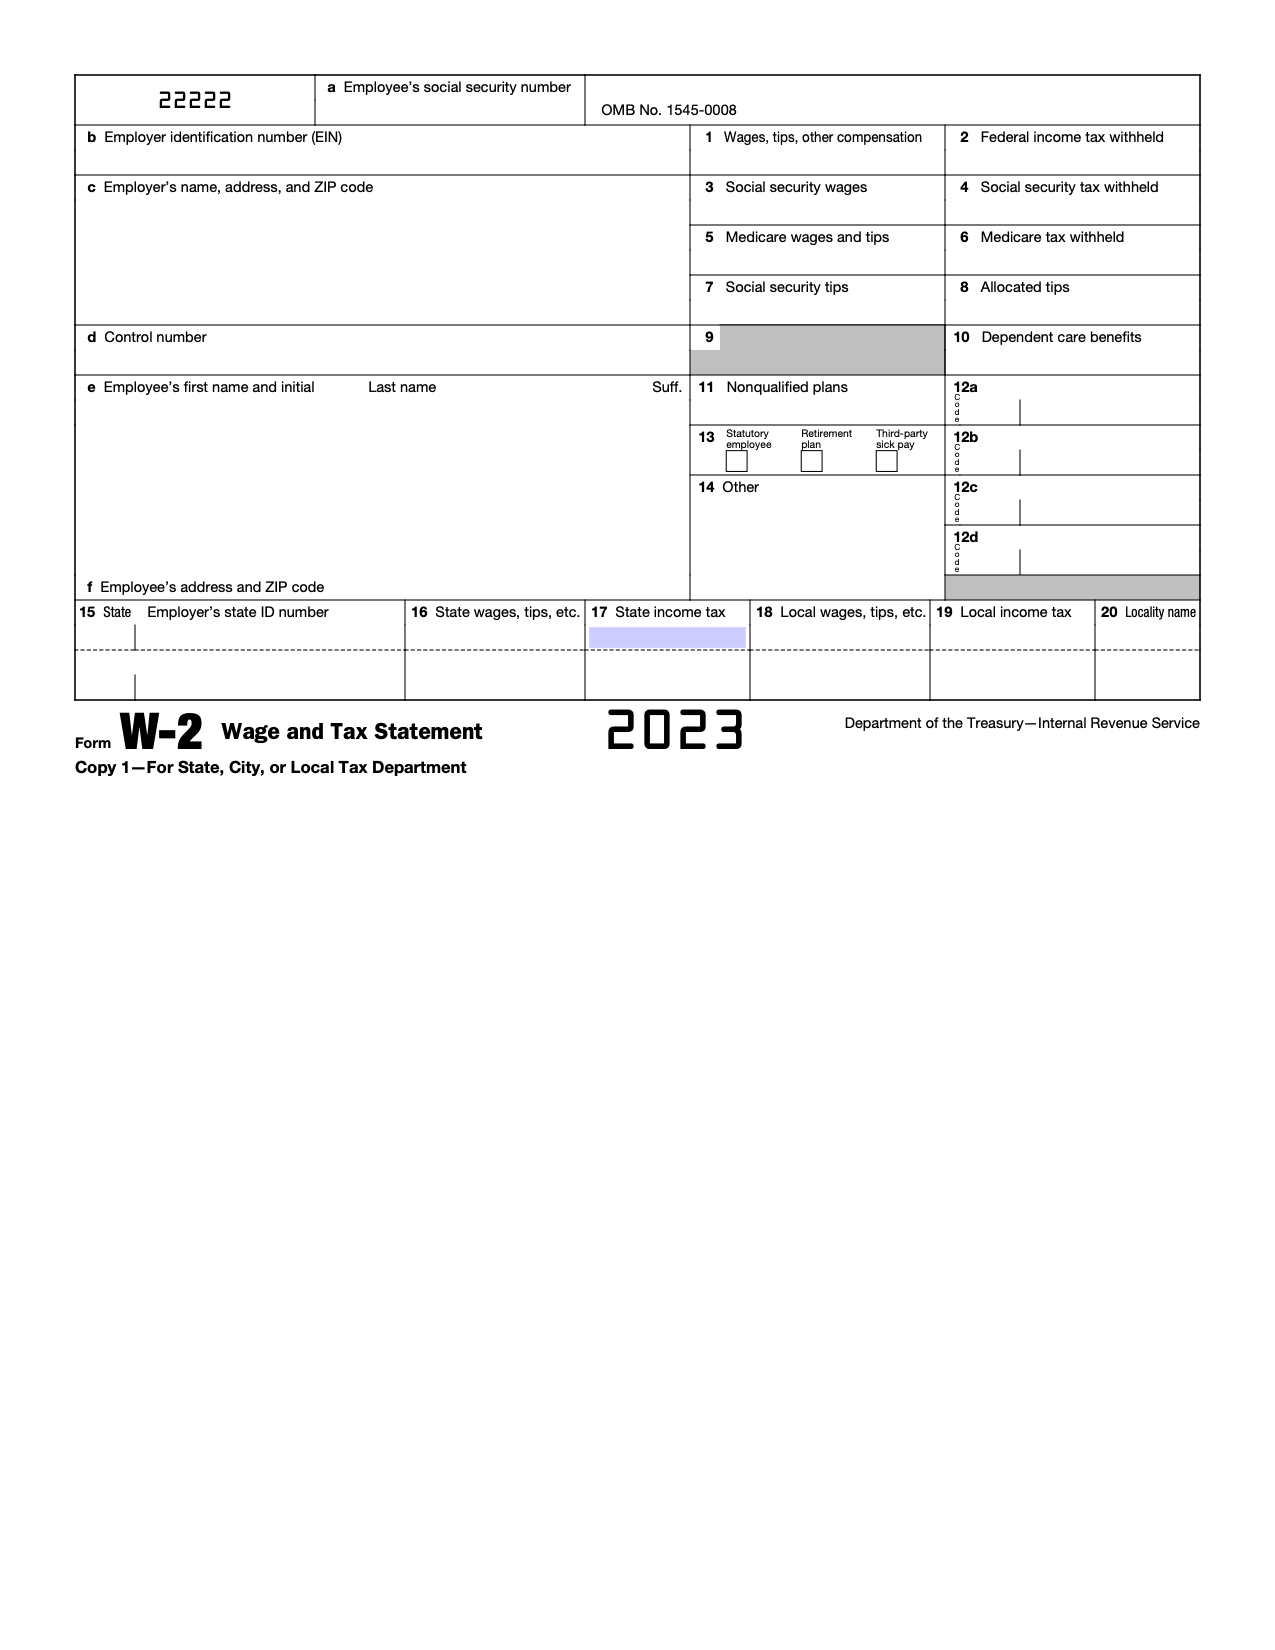 Free Irs Form W-2 | Wage And Tax Statement - Pdf – Eforms throughout W2 Form 2024 Printable